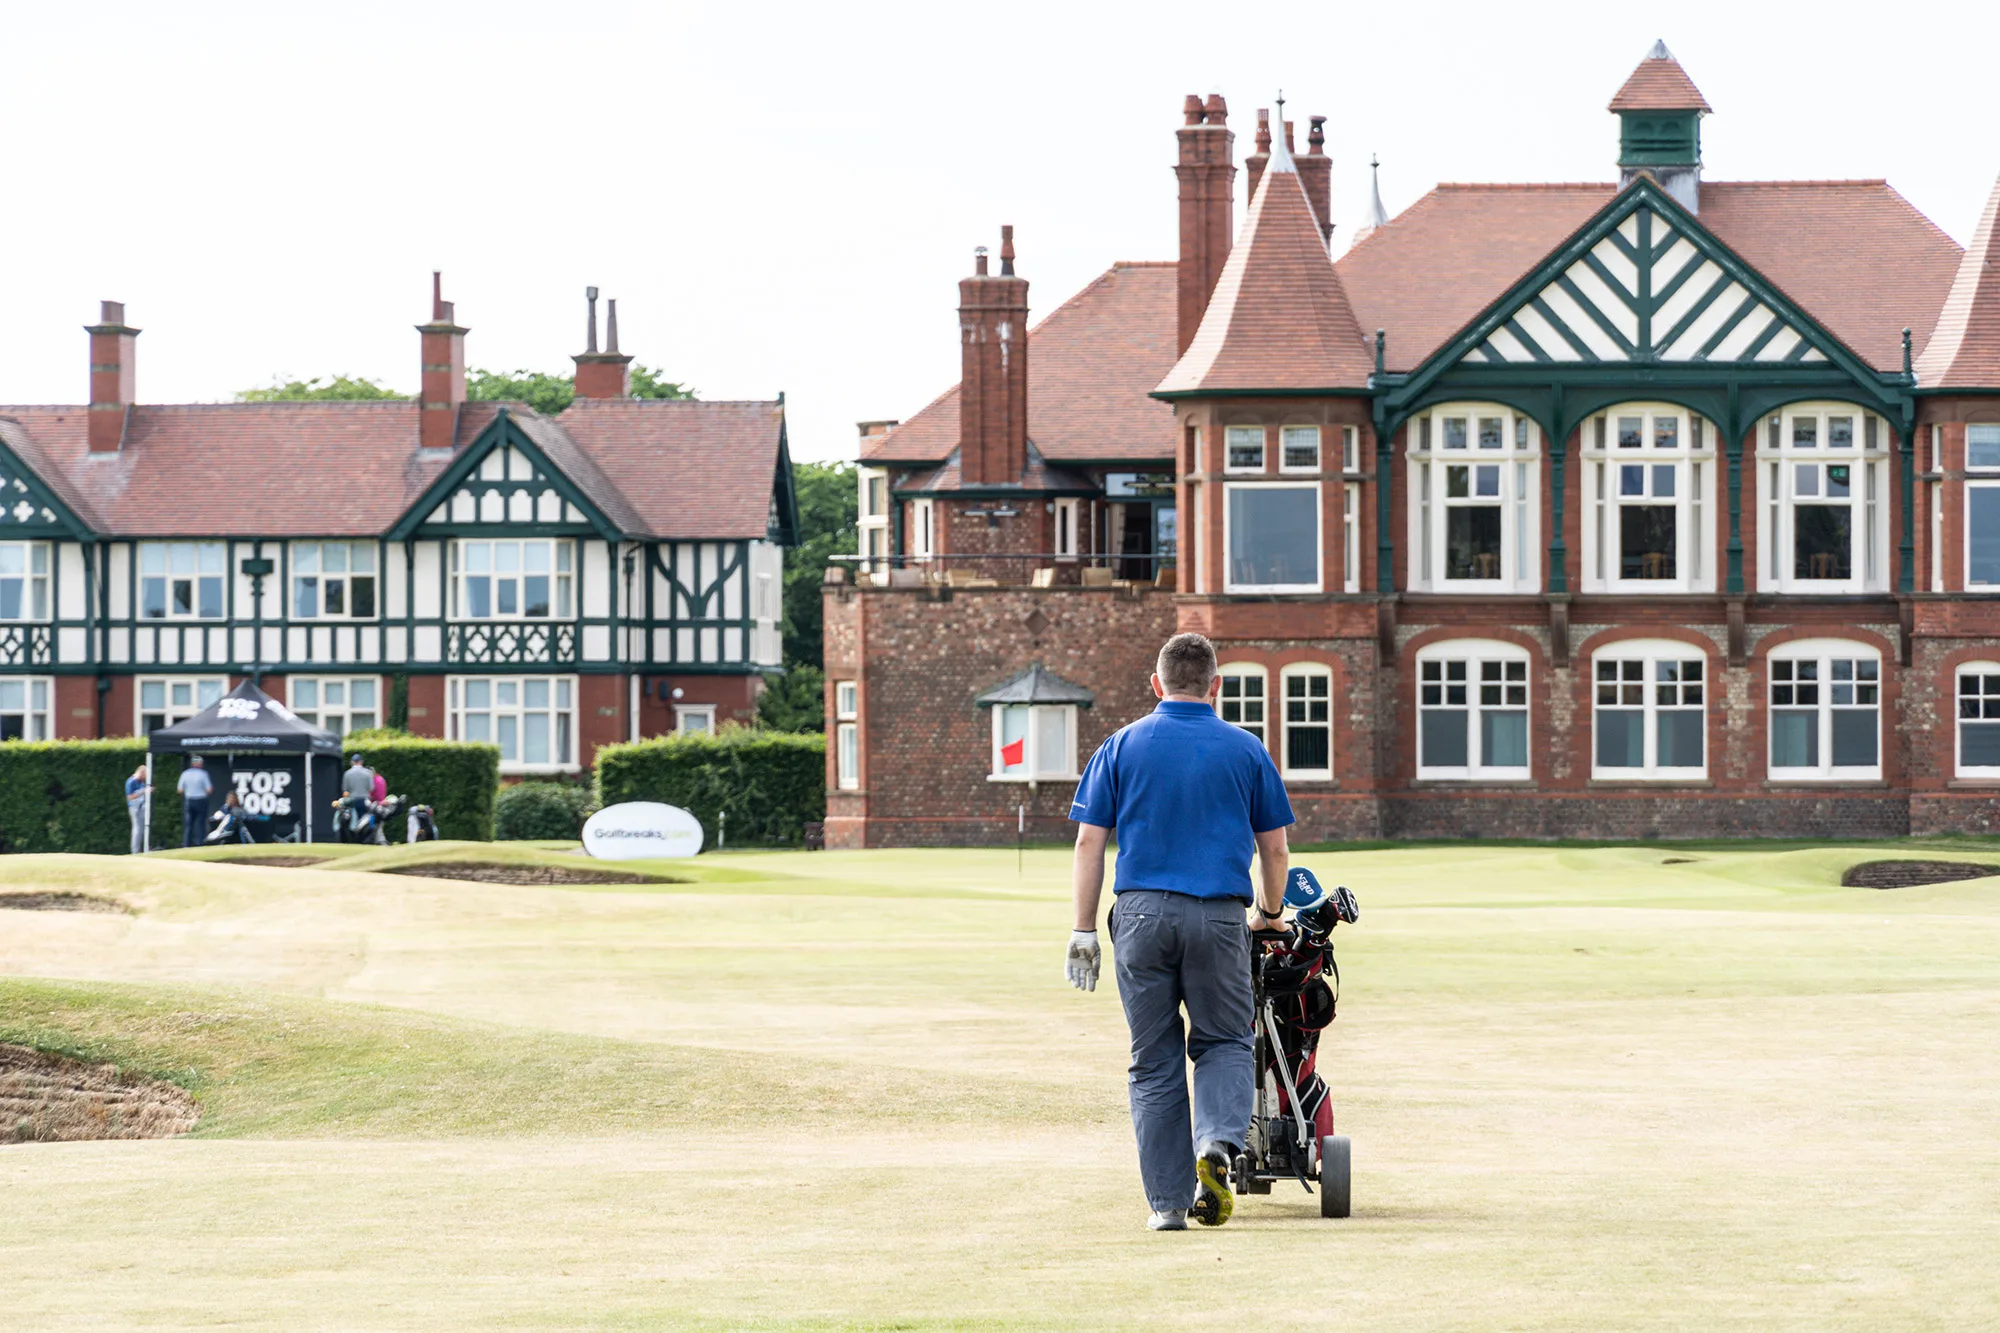 Book your end-of-season golf trip with the NCG Top 100s Tour